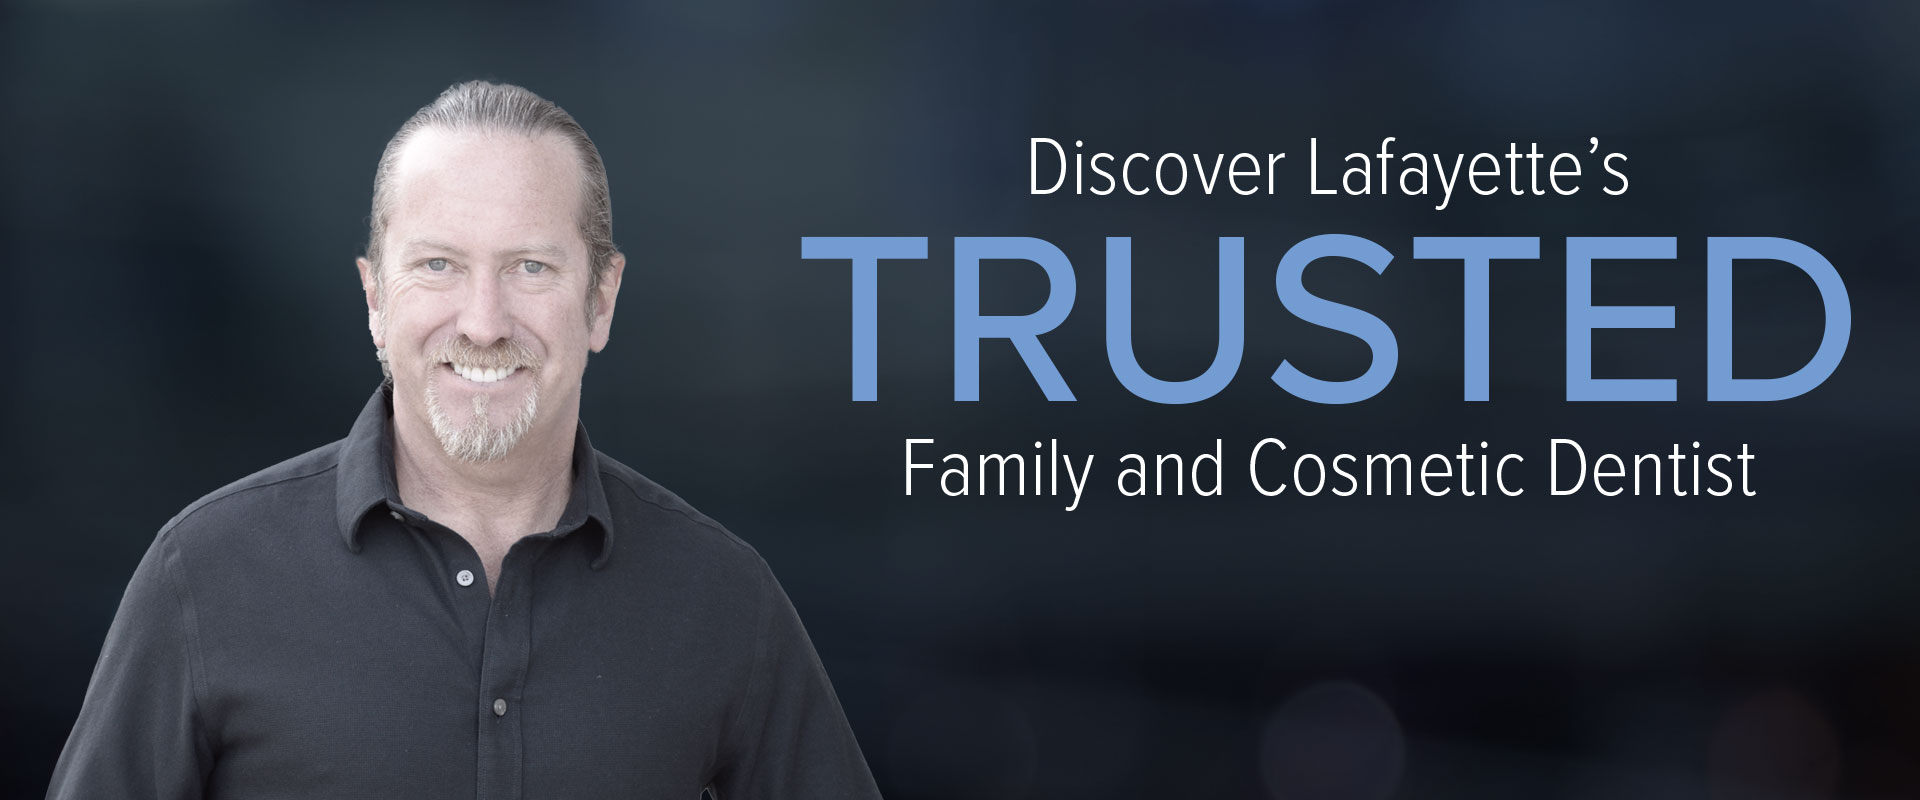 Discover Lafayette’s Trusted Family and Cosmetic Dentist